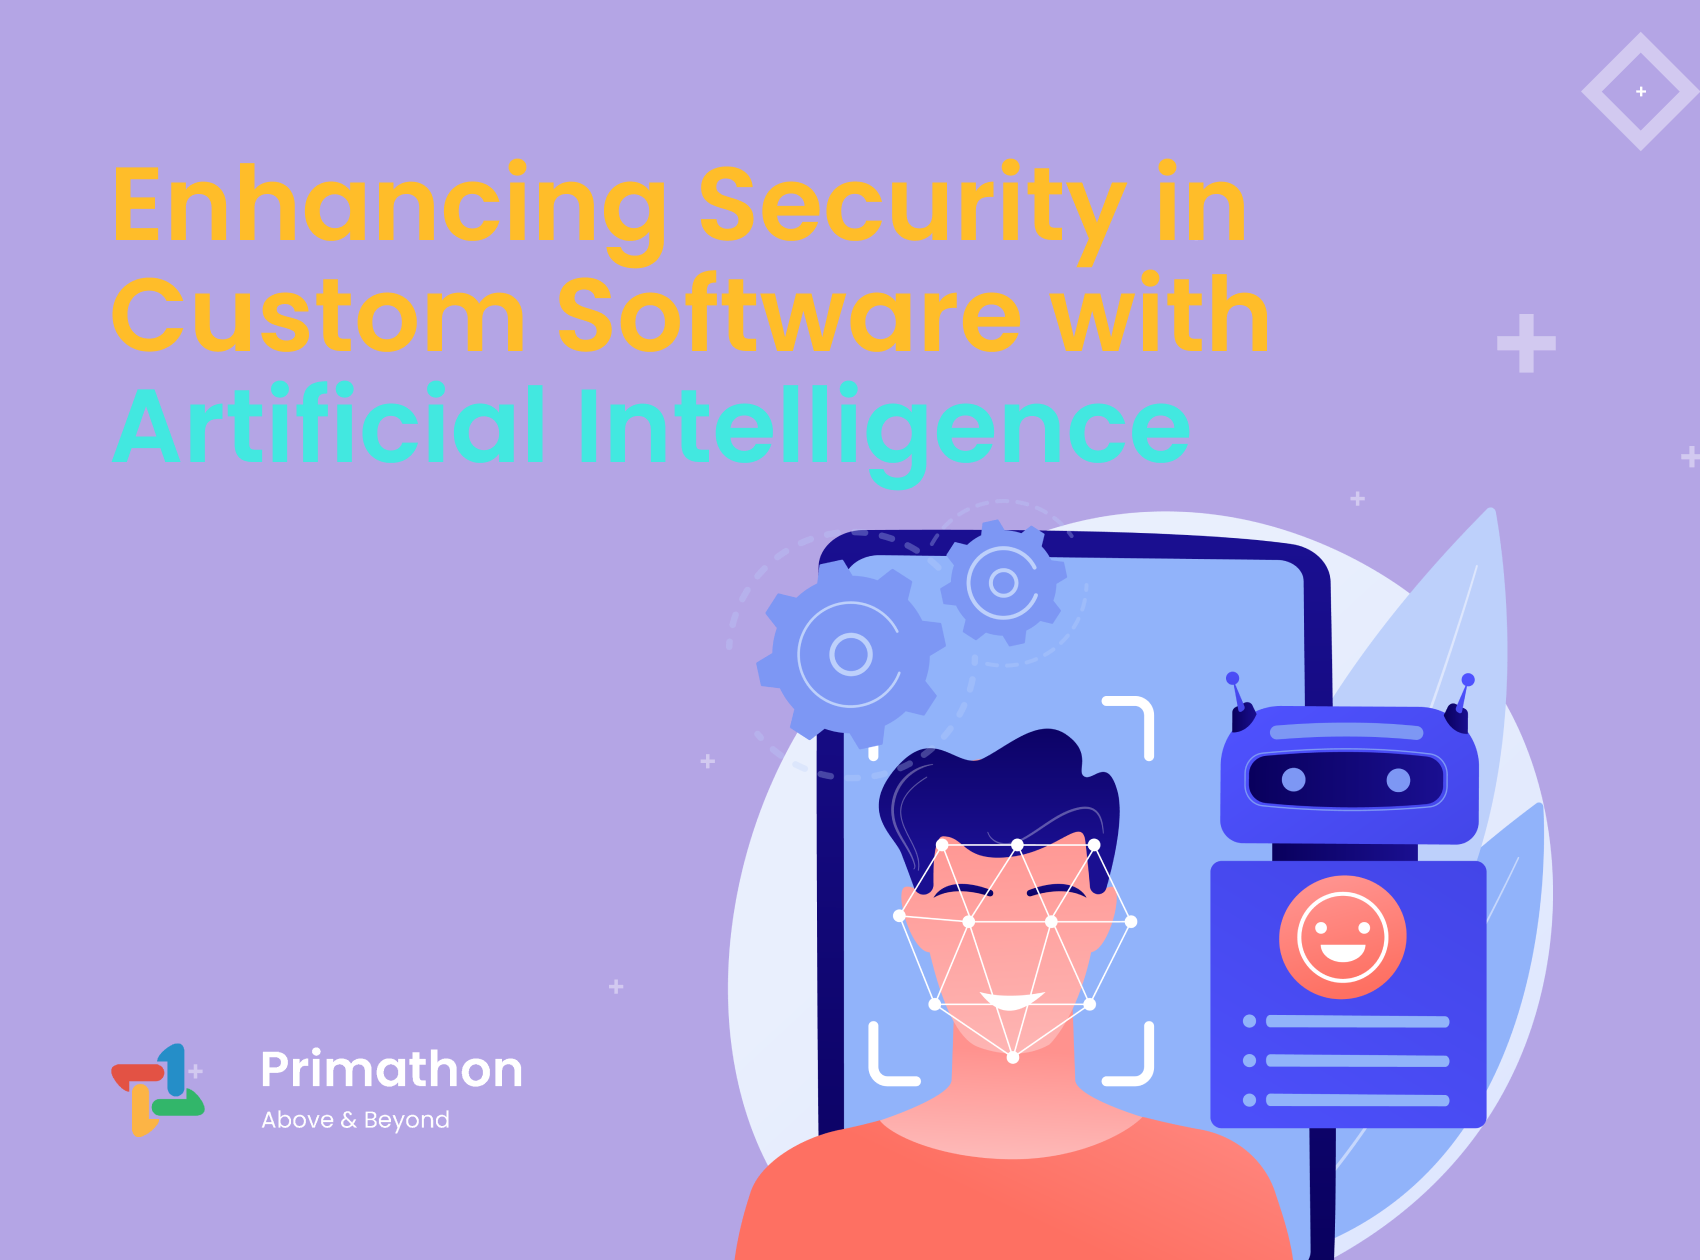 Enhancing Security in Custom Software with Artificial Intelligence